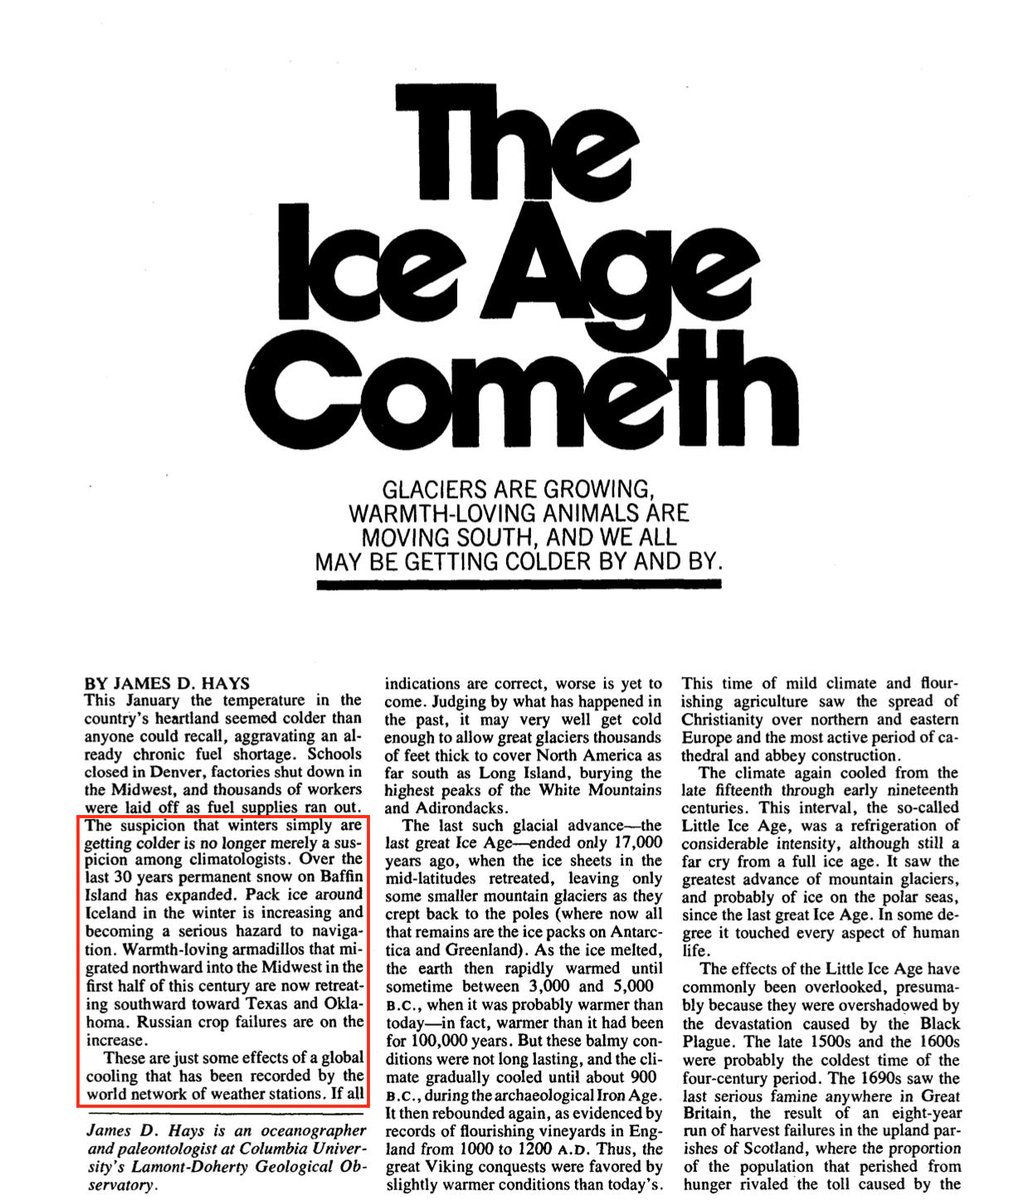 9.1973 - The ice age is coming according to data recorded by the global network of weather reporting stations. http://www.unz.com/print/SaturdayRev-1973mar24-00029/